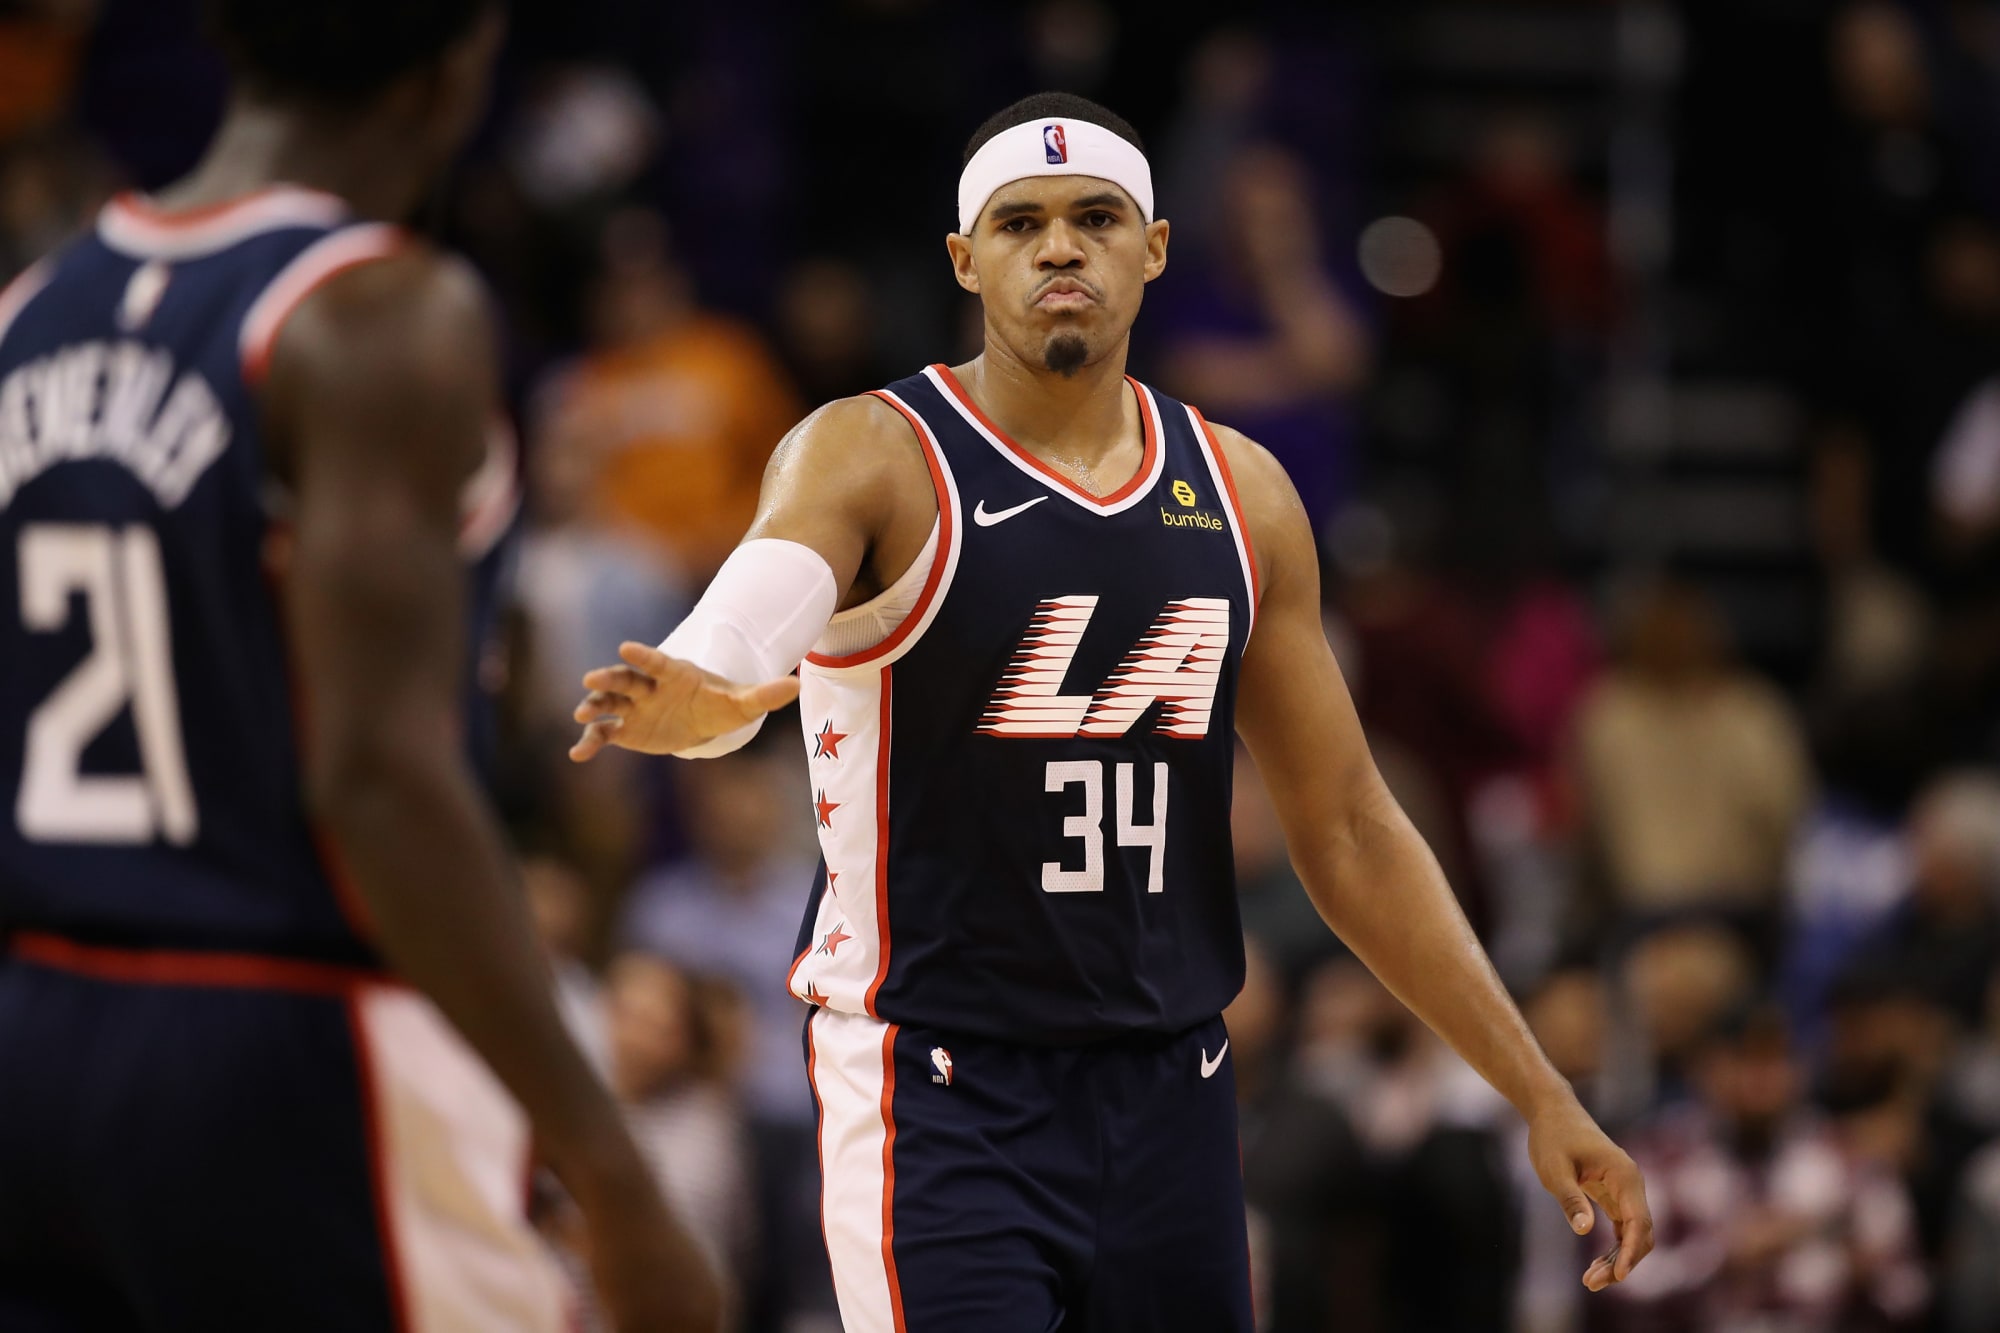 Tobias Harris of the LA Clippers deserves to be an All-Star